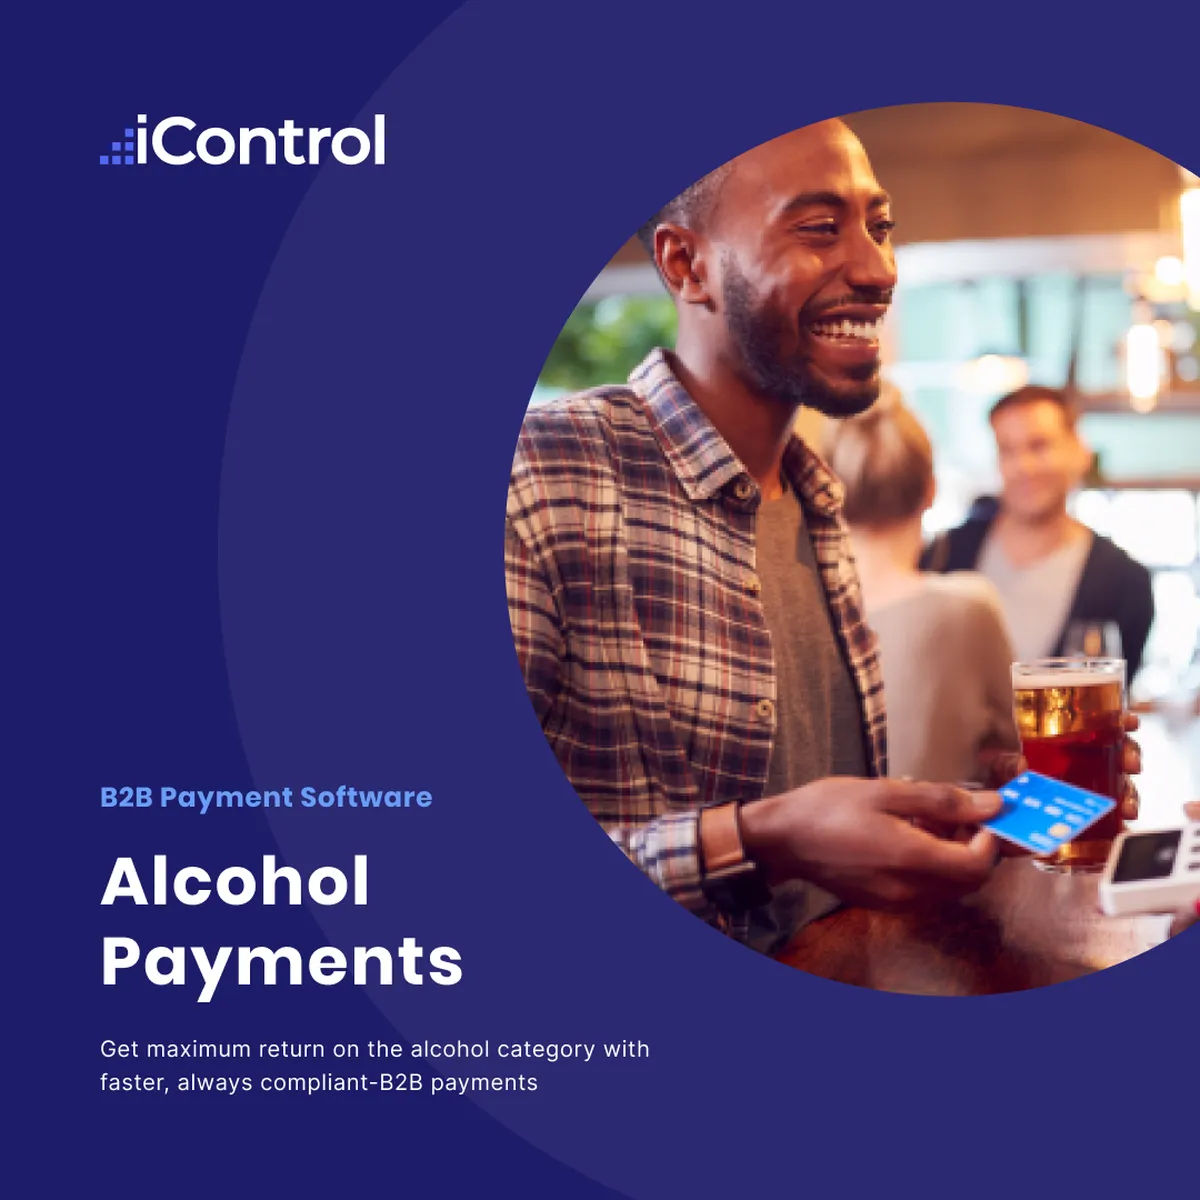 iControl Alcohol Payments Review